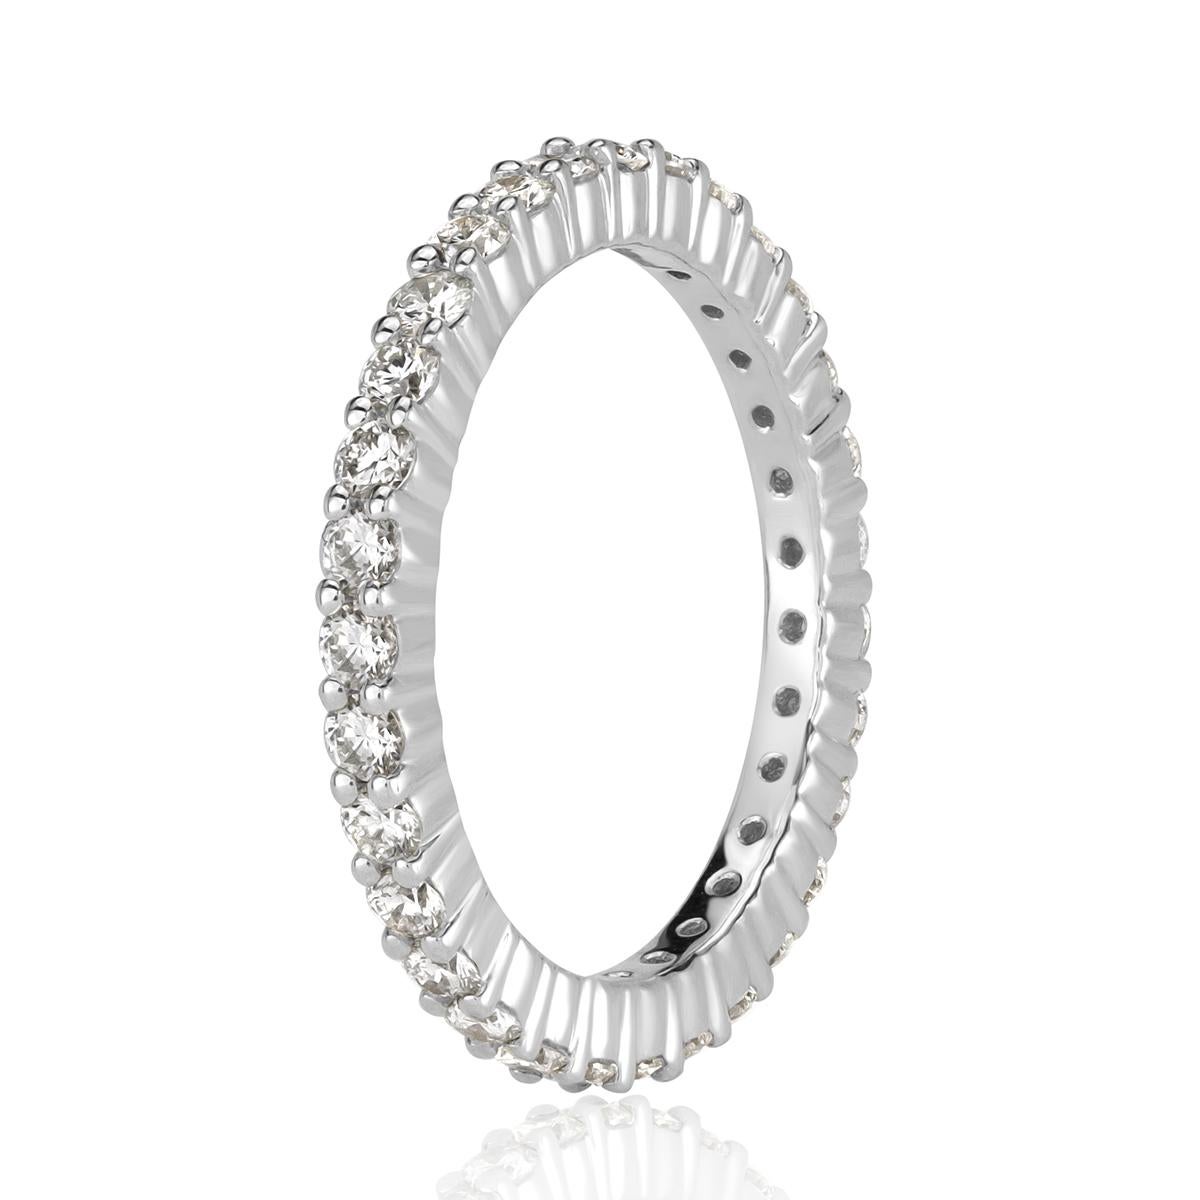 Impeccably handcrafted in platinum, this exquisite diamond eternity band features 1.00ct of seamlessly matched round brilliant cut diamonds graded at premium qualities of E-F in color, VS1-VS2 in clarity. All eternity bands are shown in a size 6.5.